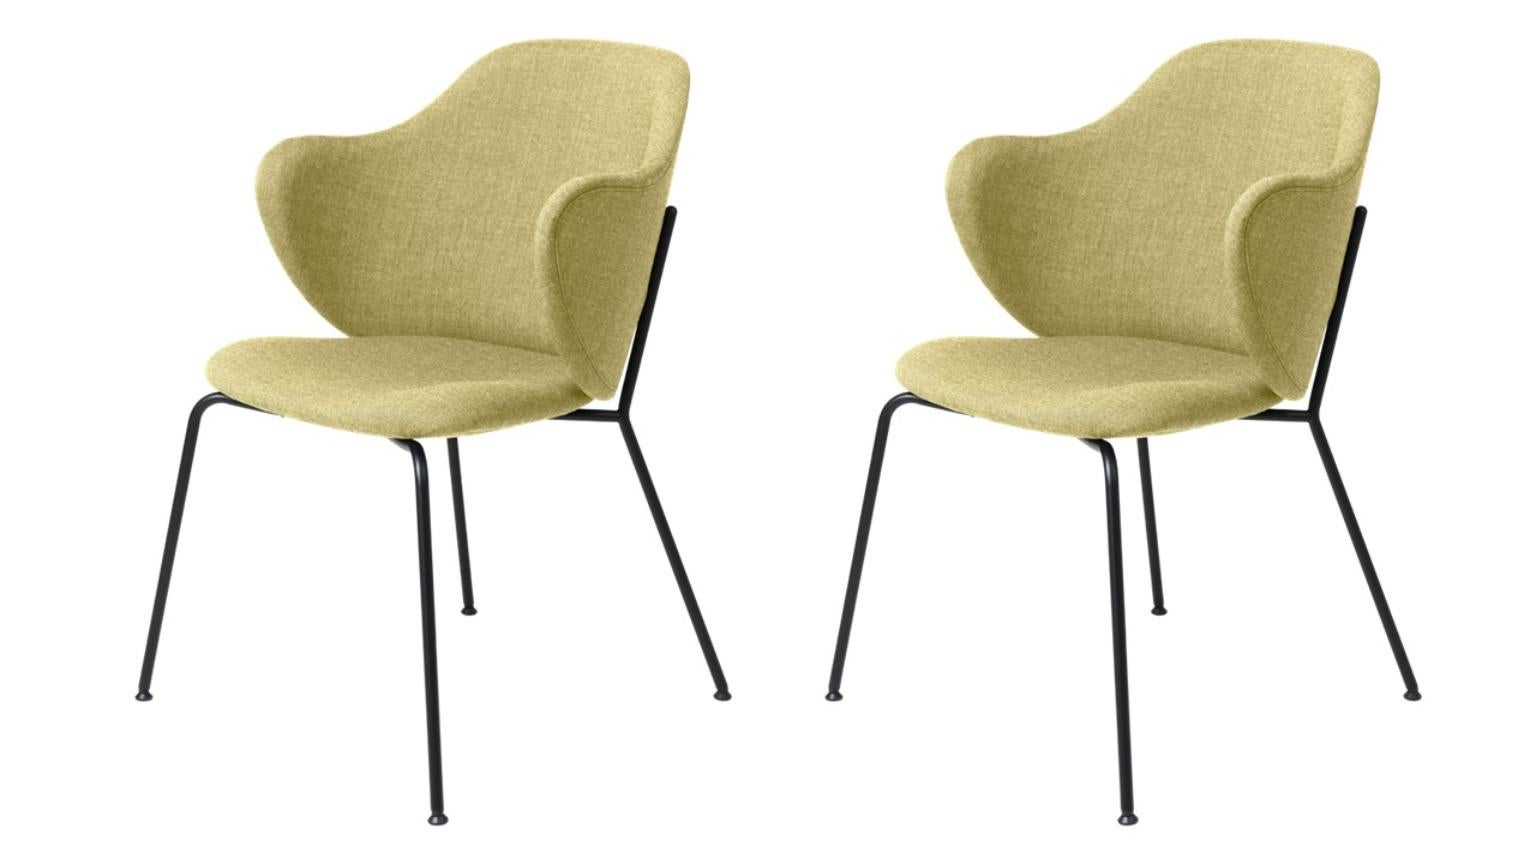 Set of 2 green Remix Lassen chairs by Lassen
Dimensions: W 58 x D 60 x H 88 cm 
Materials: Textile

The Lassen chair by Flemming Lassen, Magnus Sangild and Marianne Viktor was launched in 2018 as an ode to Flemming Lassen’s uncompromising